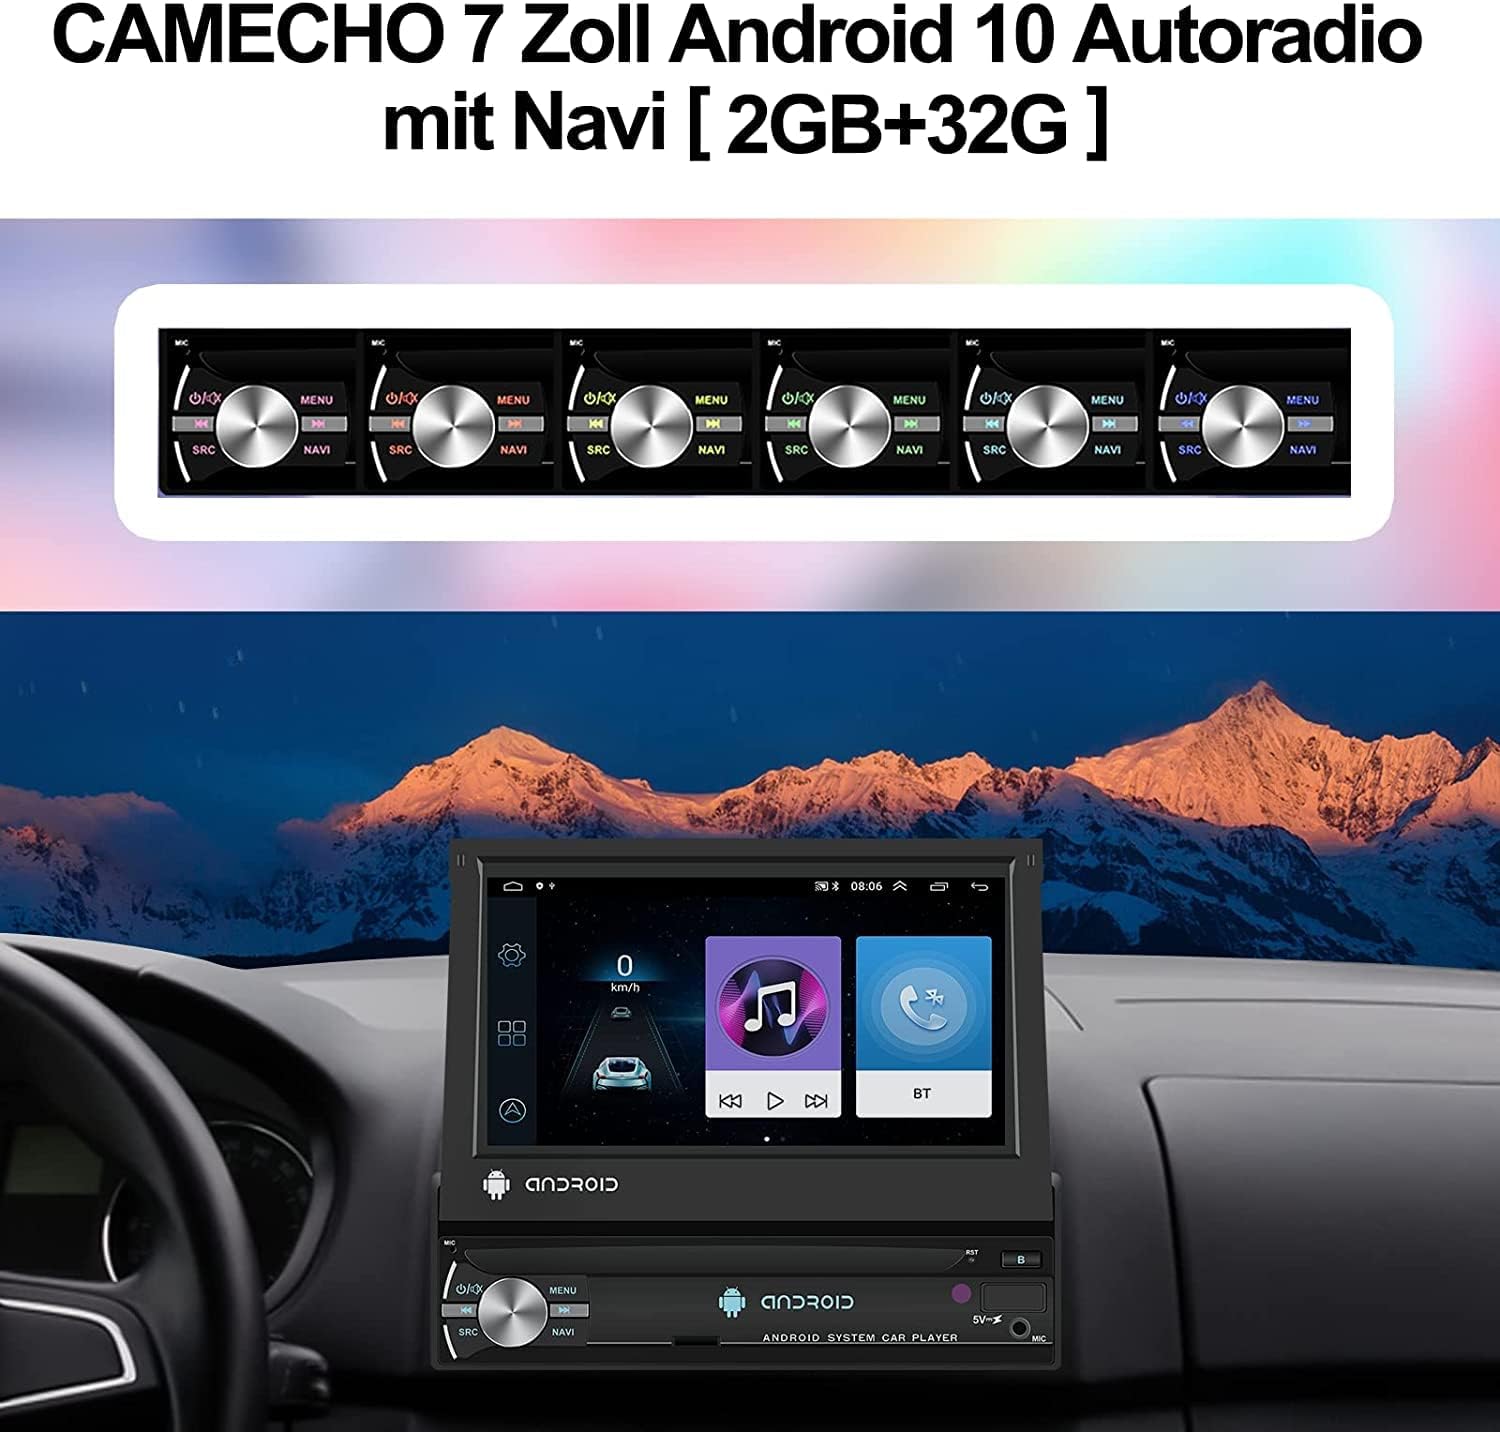 [2GB+32G] CAMECHO 1 DIN Android 10 Car Radio with Screen Navi,7 inch Touch Display with Bluetooth Handsfree I WiFi I GPS navigation I FM,RDS,EQ I USB, AUX I Mirror link+rear camera